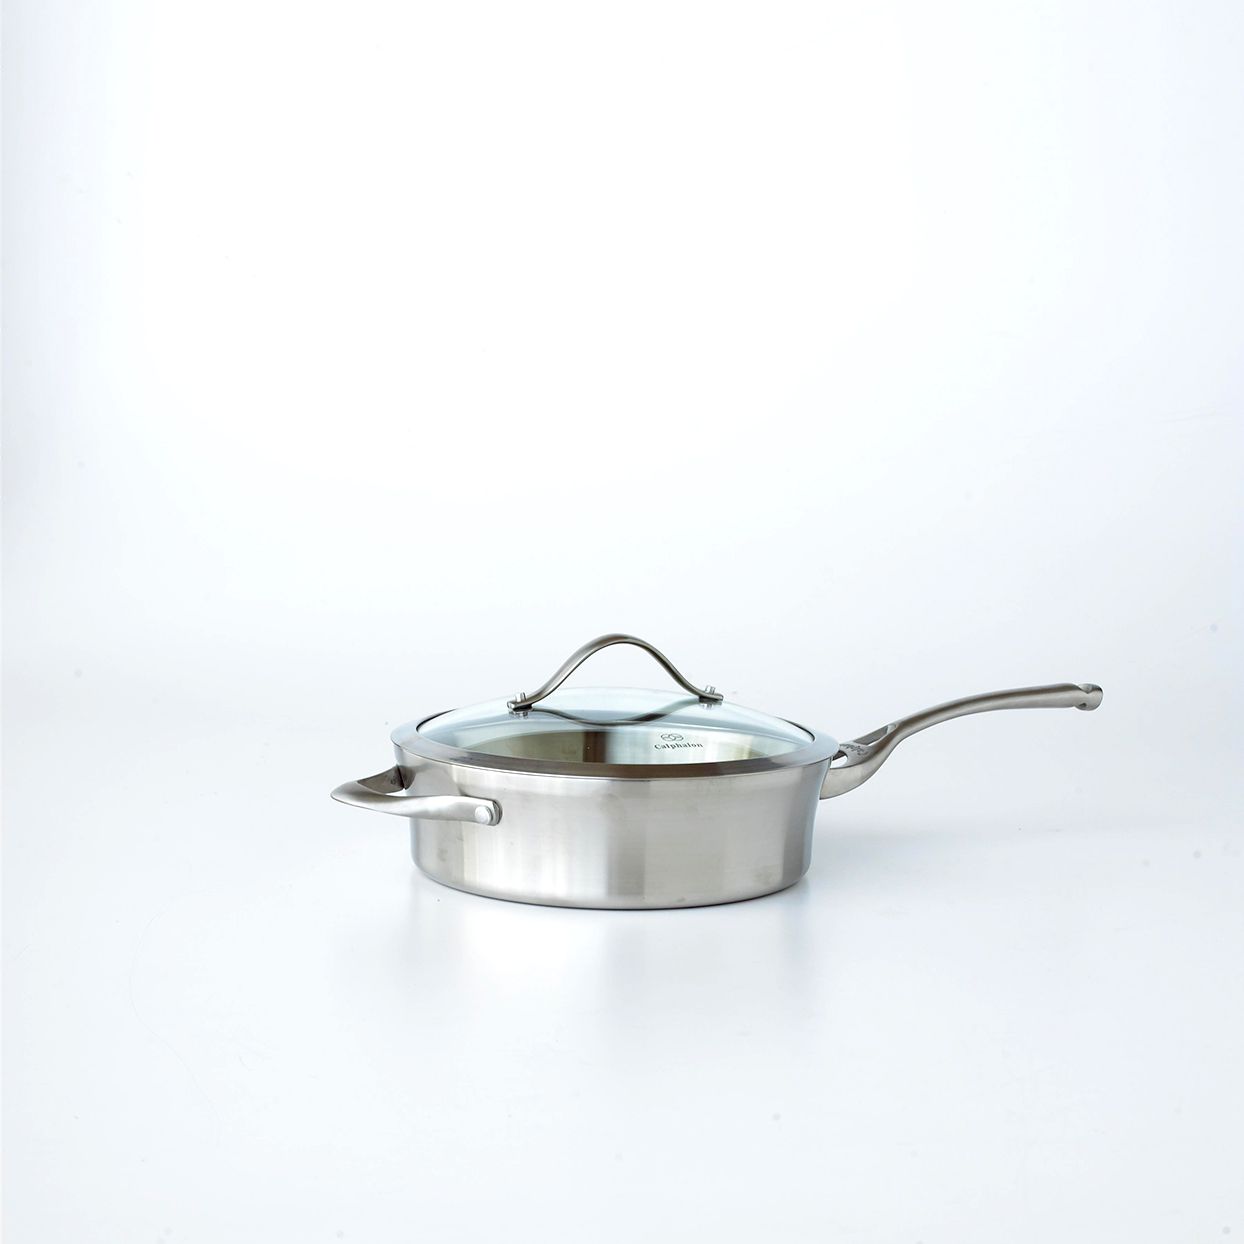 Empty 12-inch saut&eacute; pan with clear glass lid sitting on white surface.